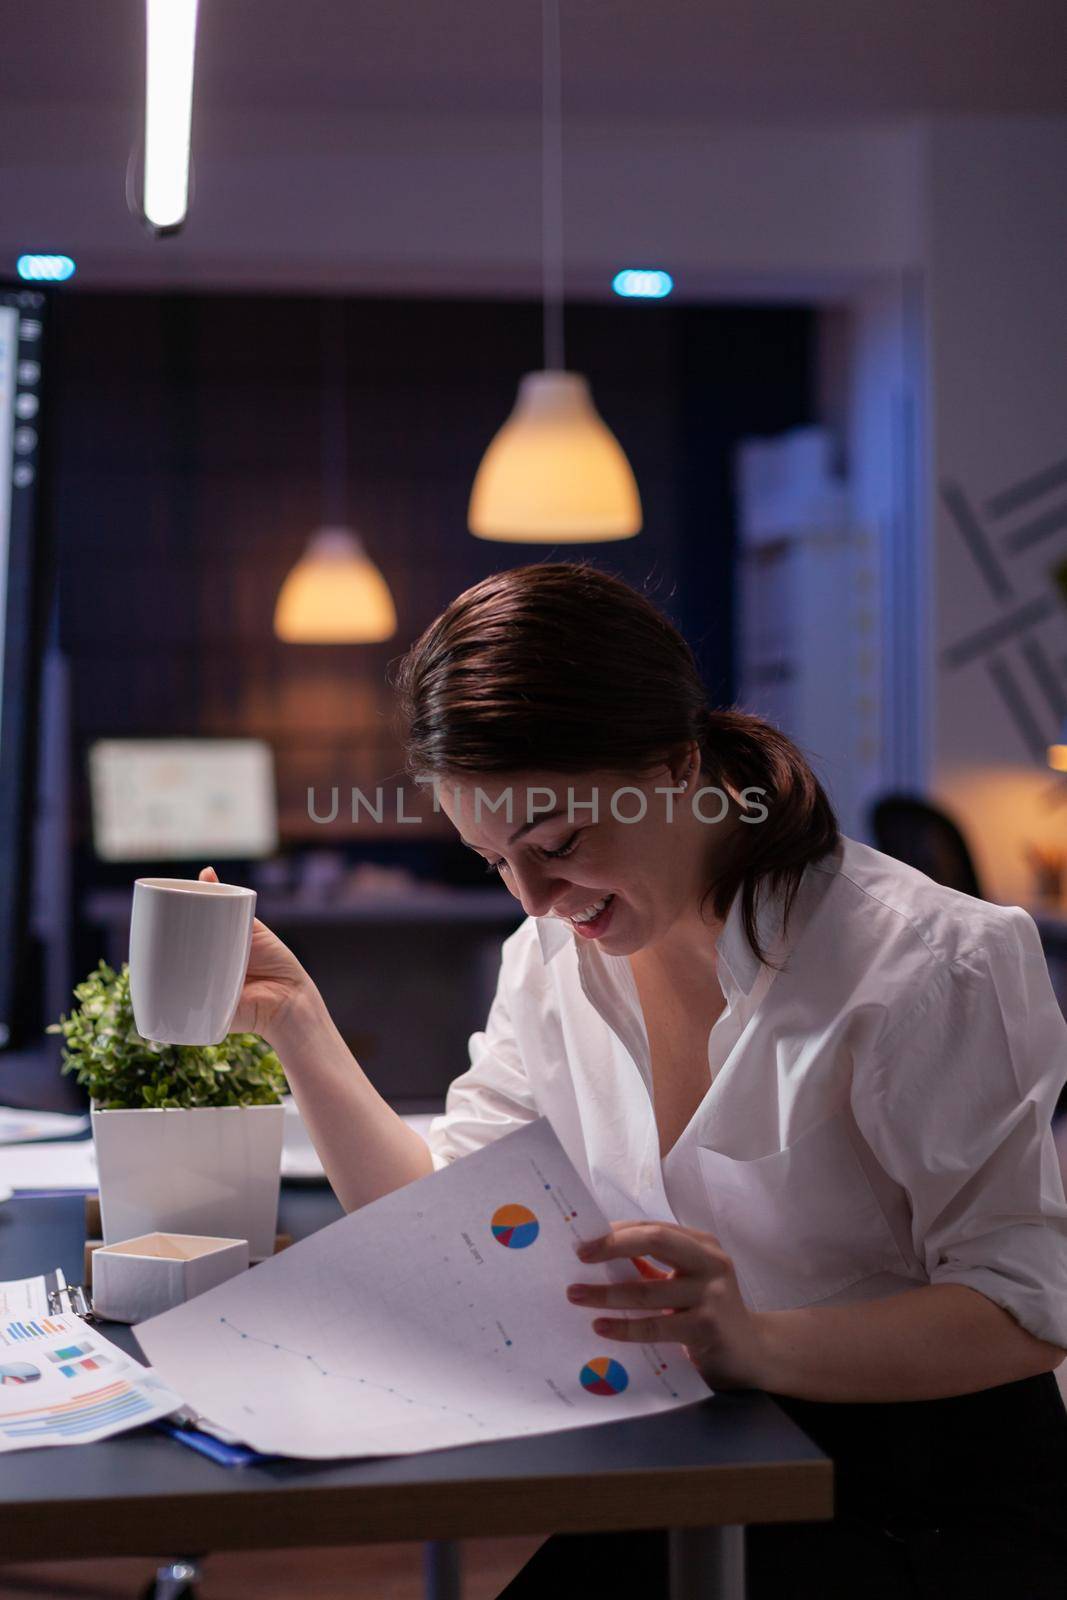 Workaholic businesswoman looking at reports presentation on monitor comparing with financial chart on paperwork. Focused manager working in business company meeting office room late at night